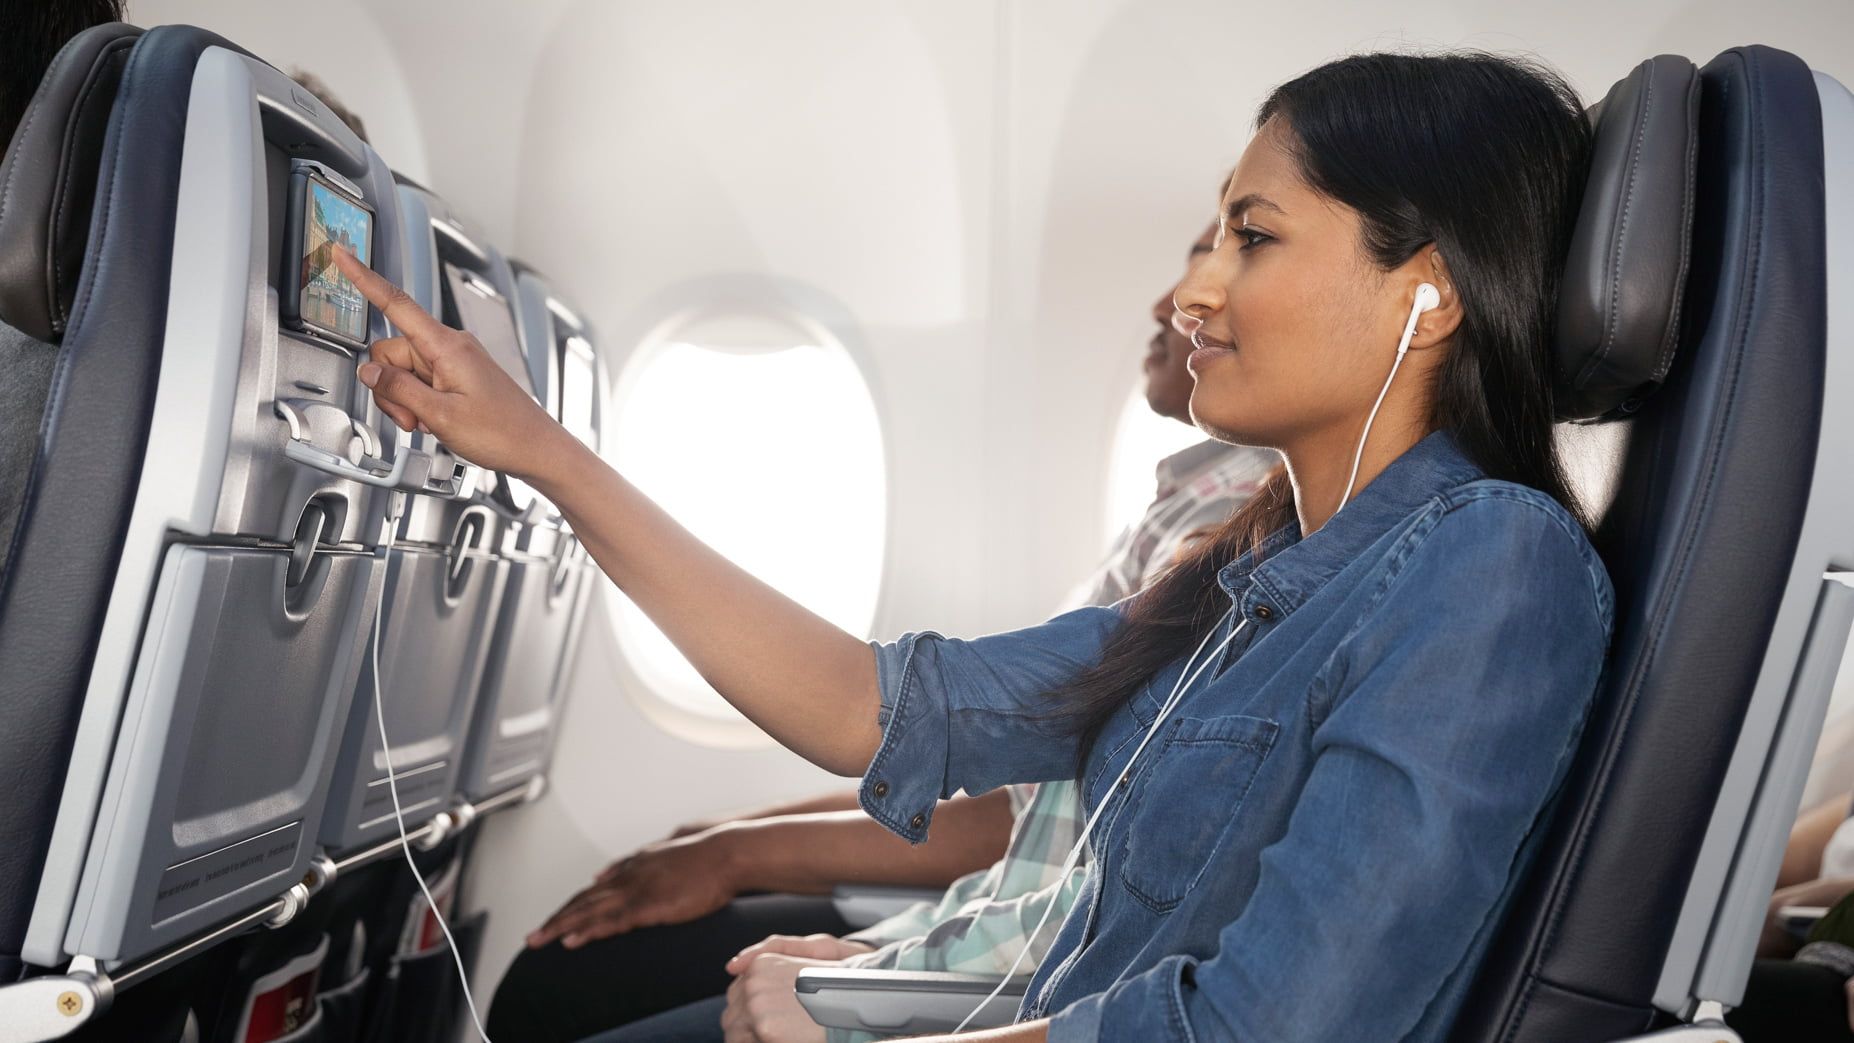 A woman kicks back in her airplane seat and queues up some in-flight entertainment